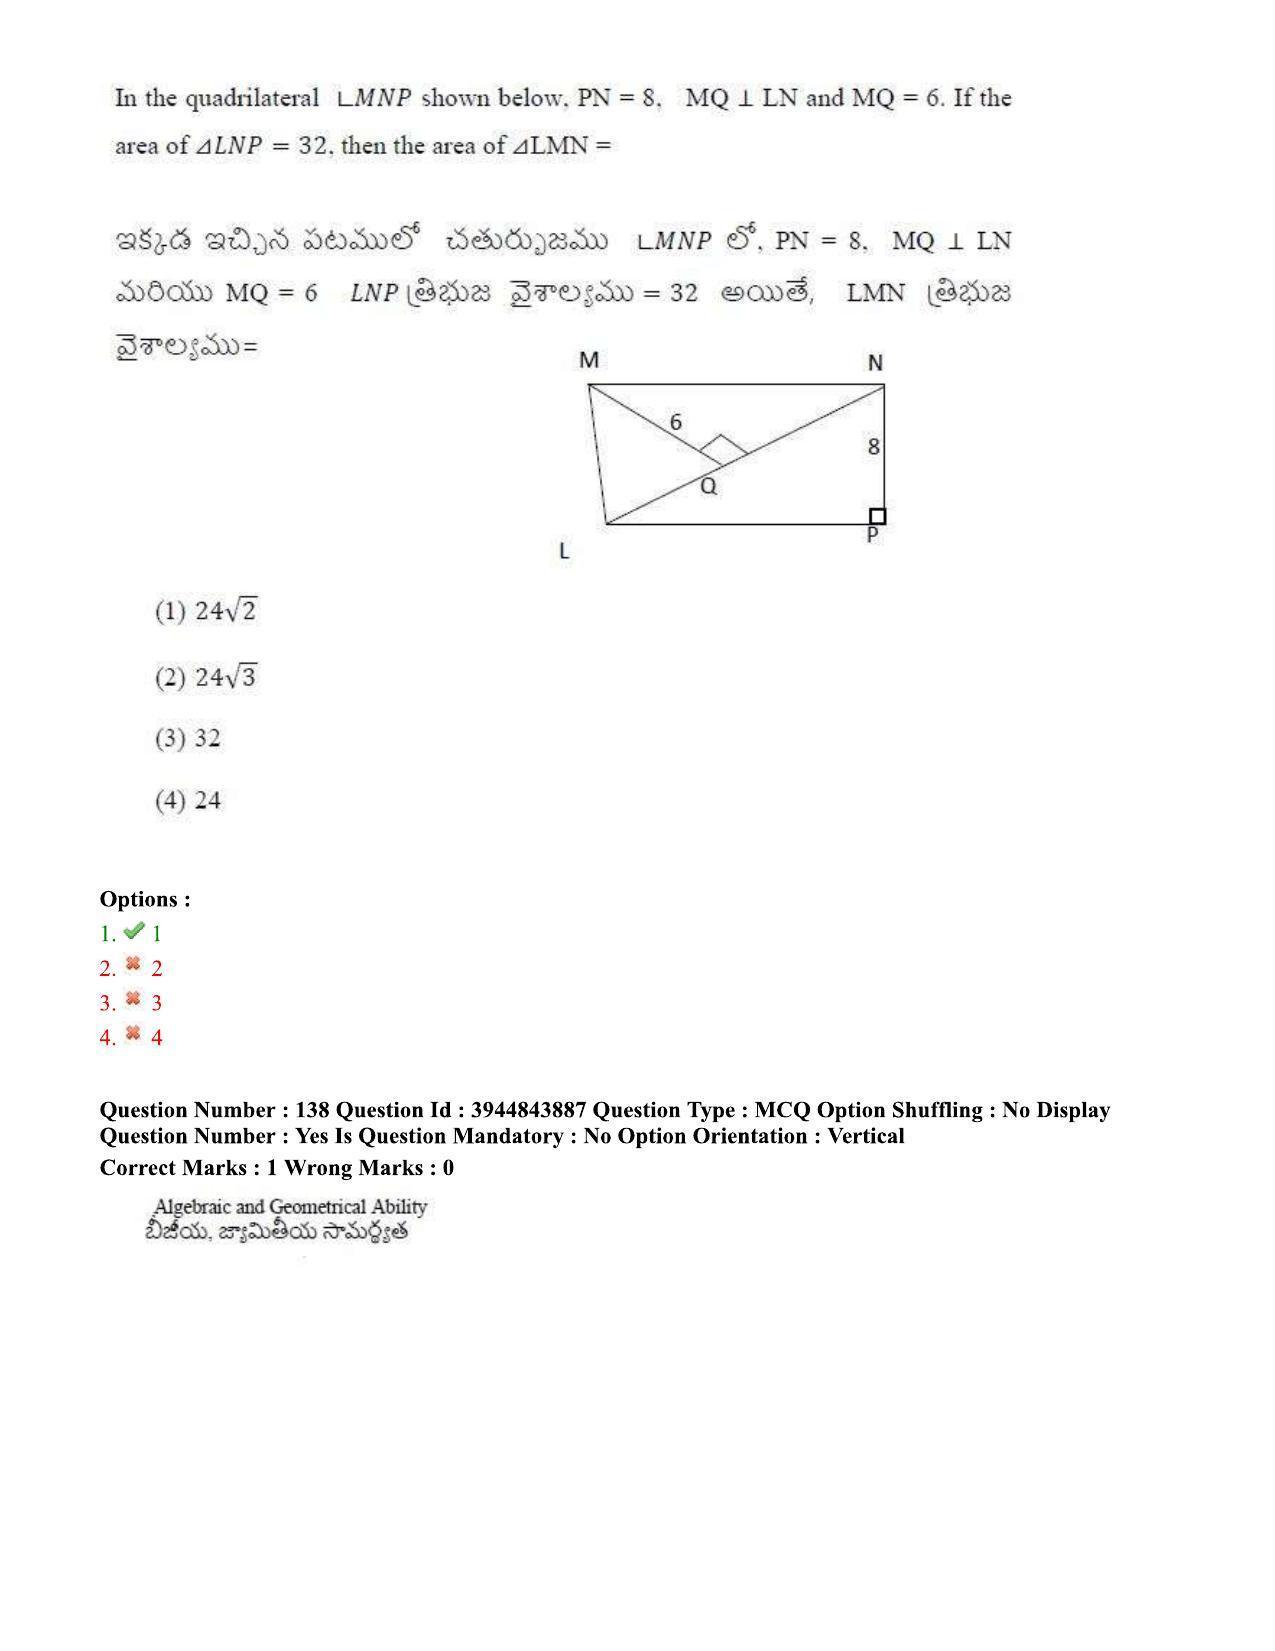 TS ICET 2020 Question Paper 1 - Oct 1, 2020	 - Page 107